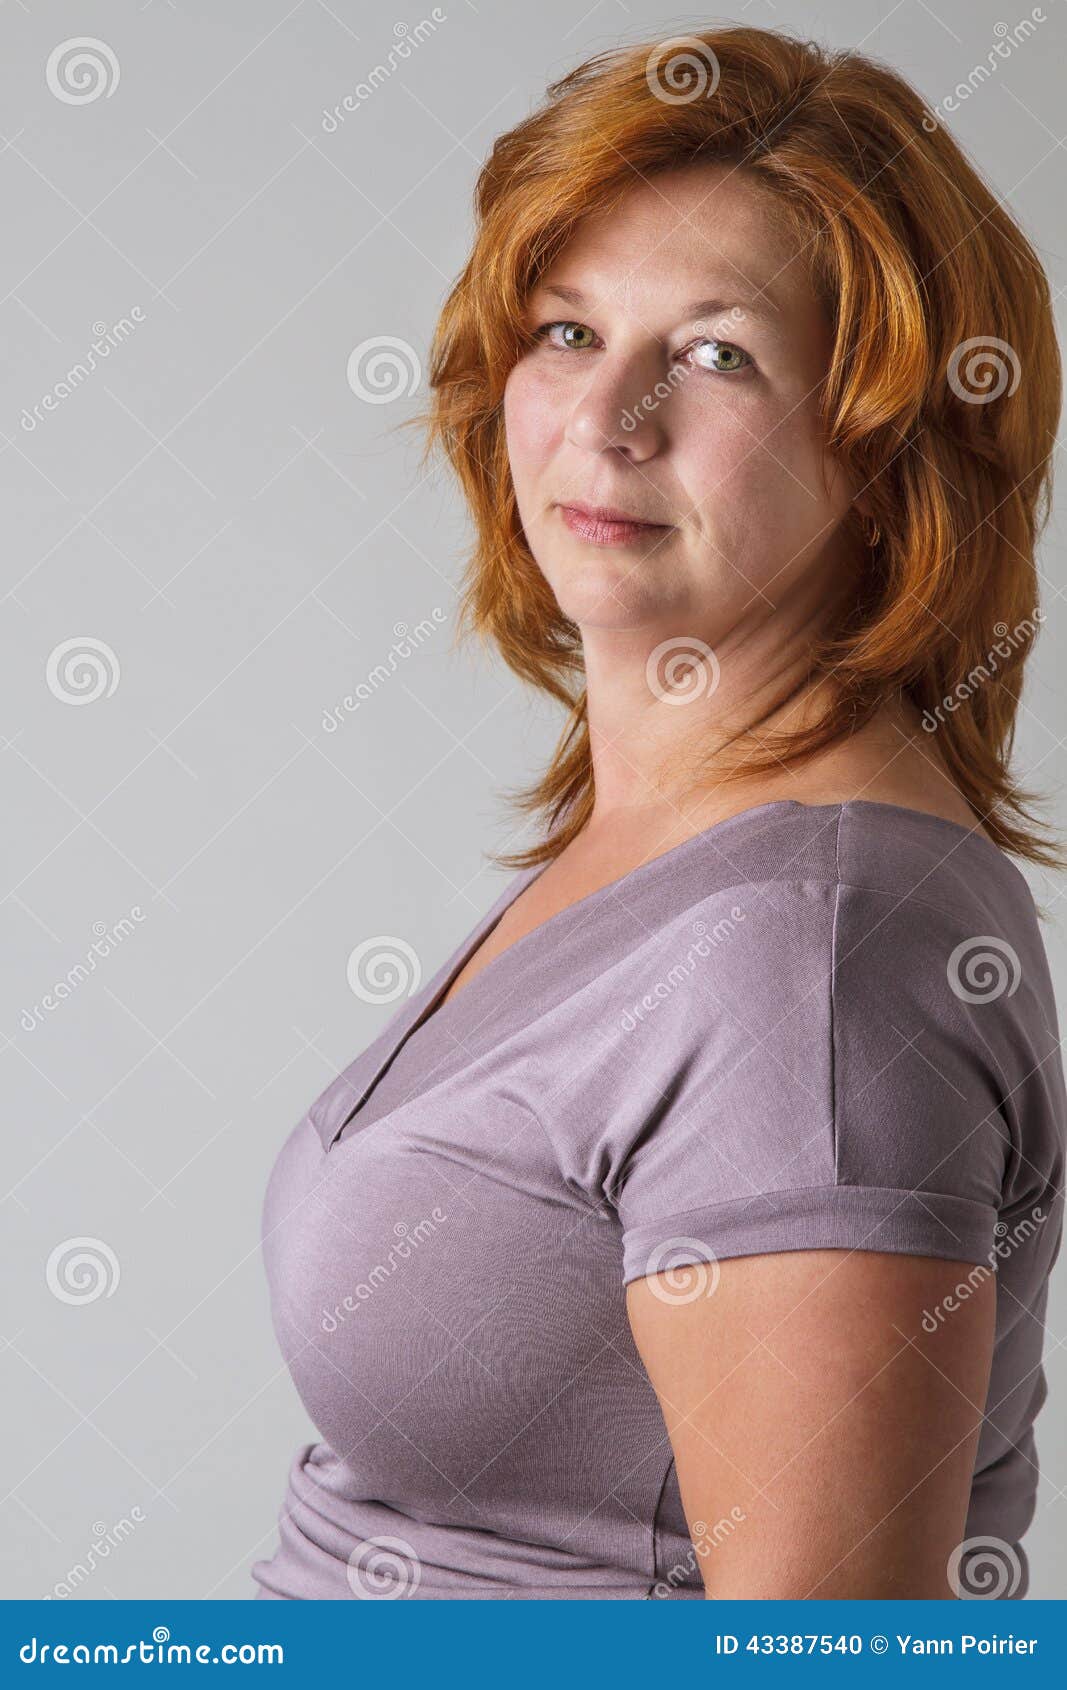 Green Eyes And Red Hair Stock Photo Image Of Caucasian 43387540